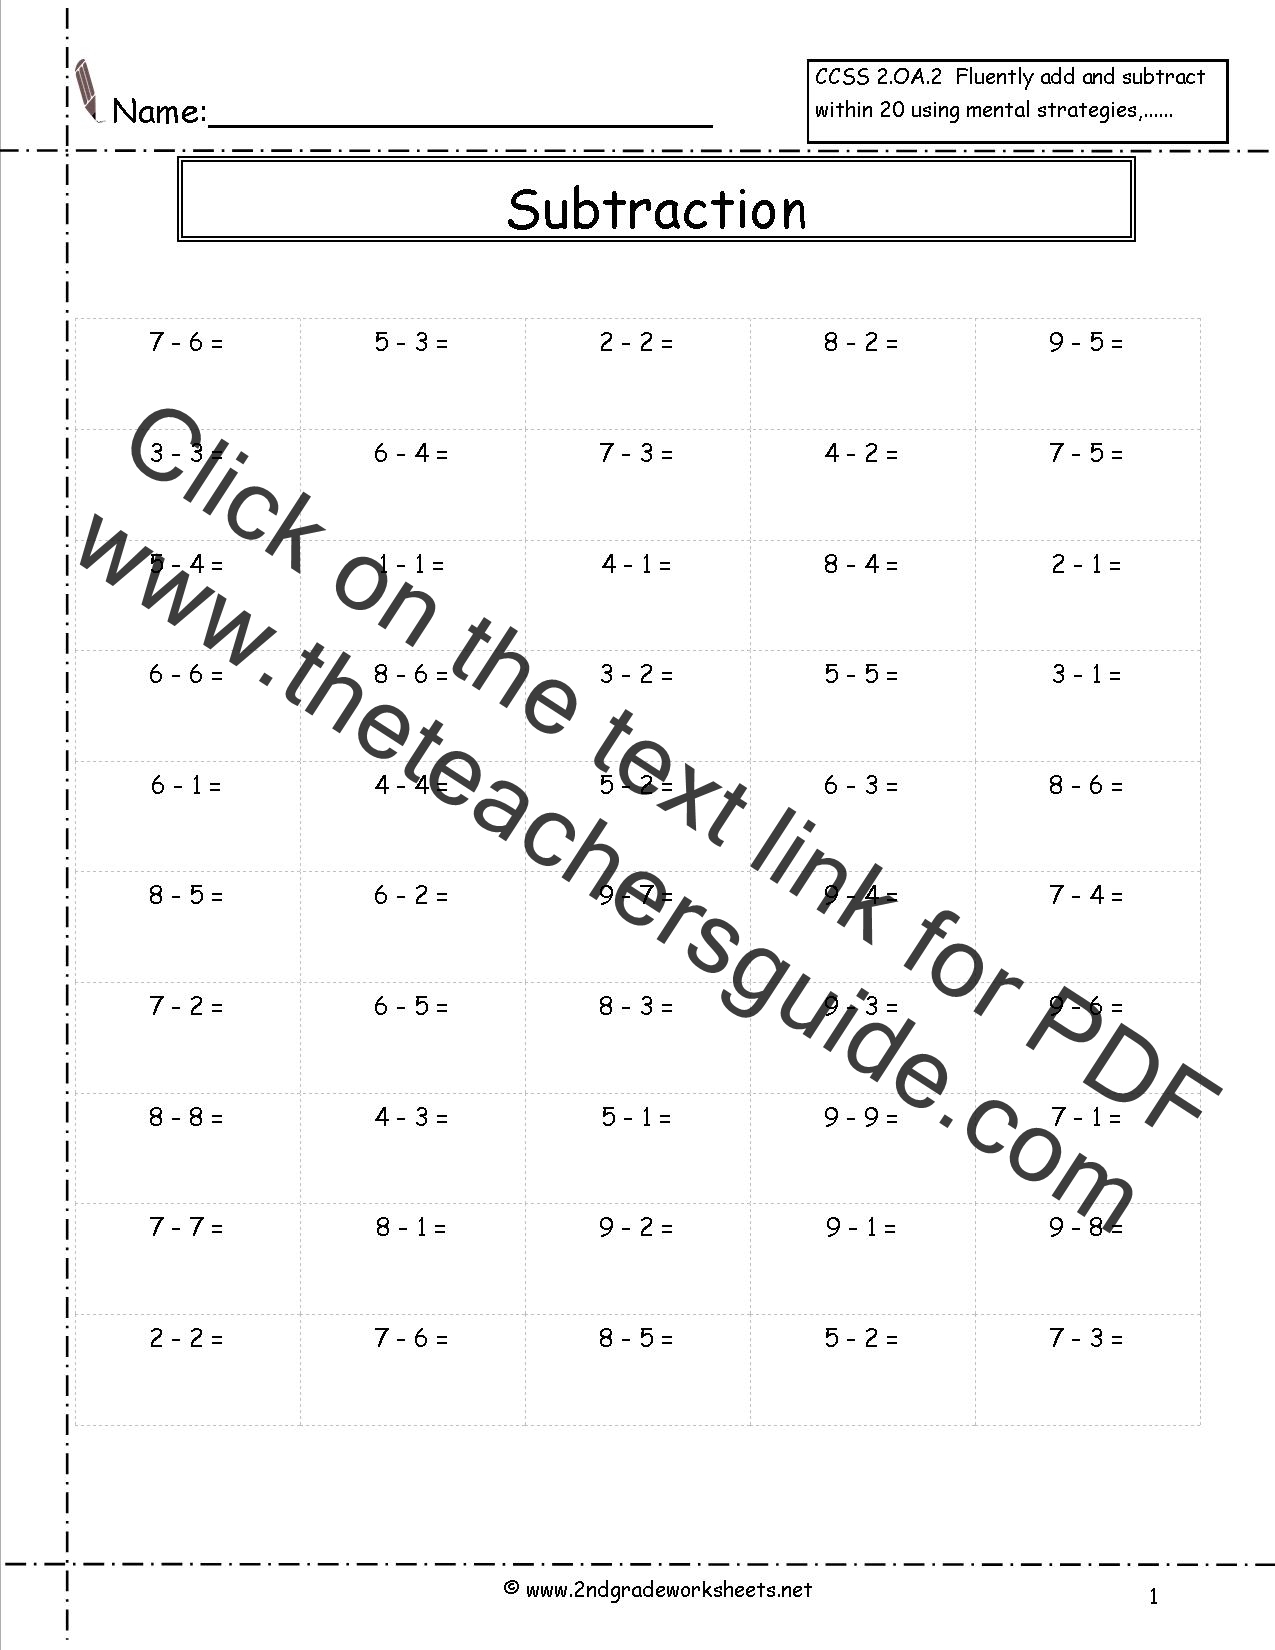 online-game-questions-to-ask-single-digit-addition-worksheet-generator